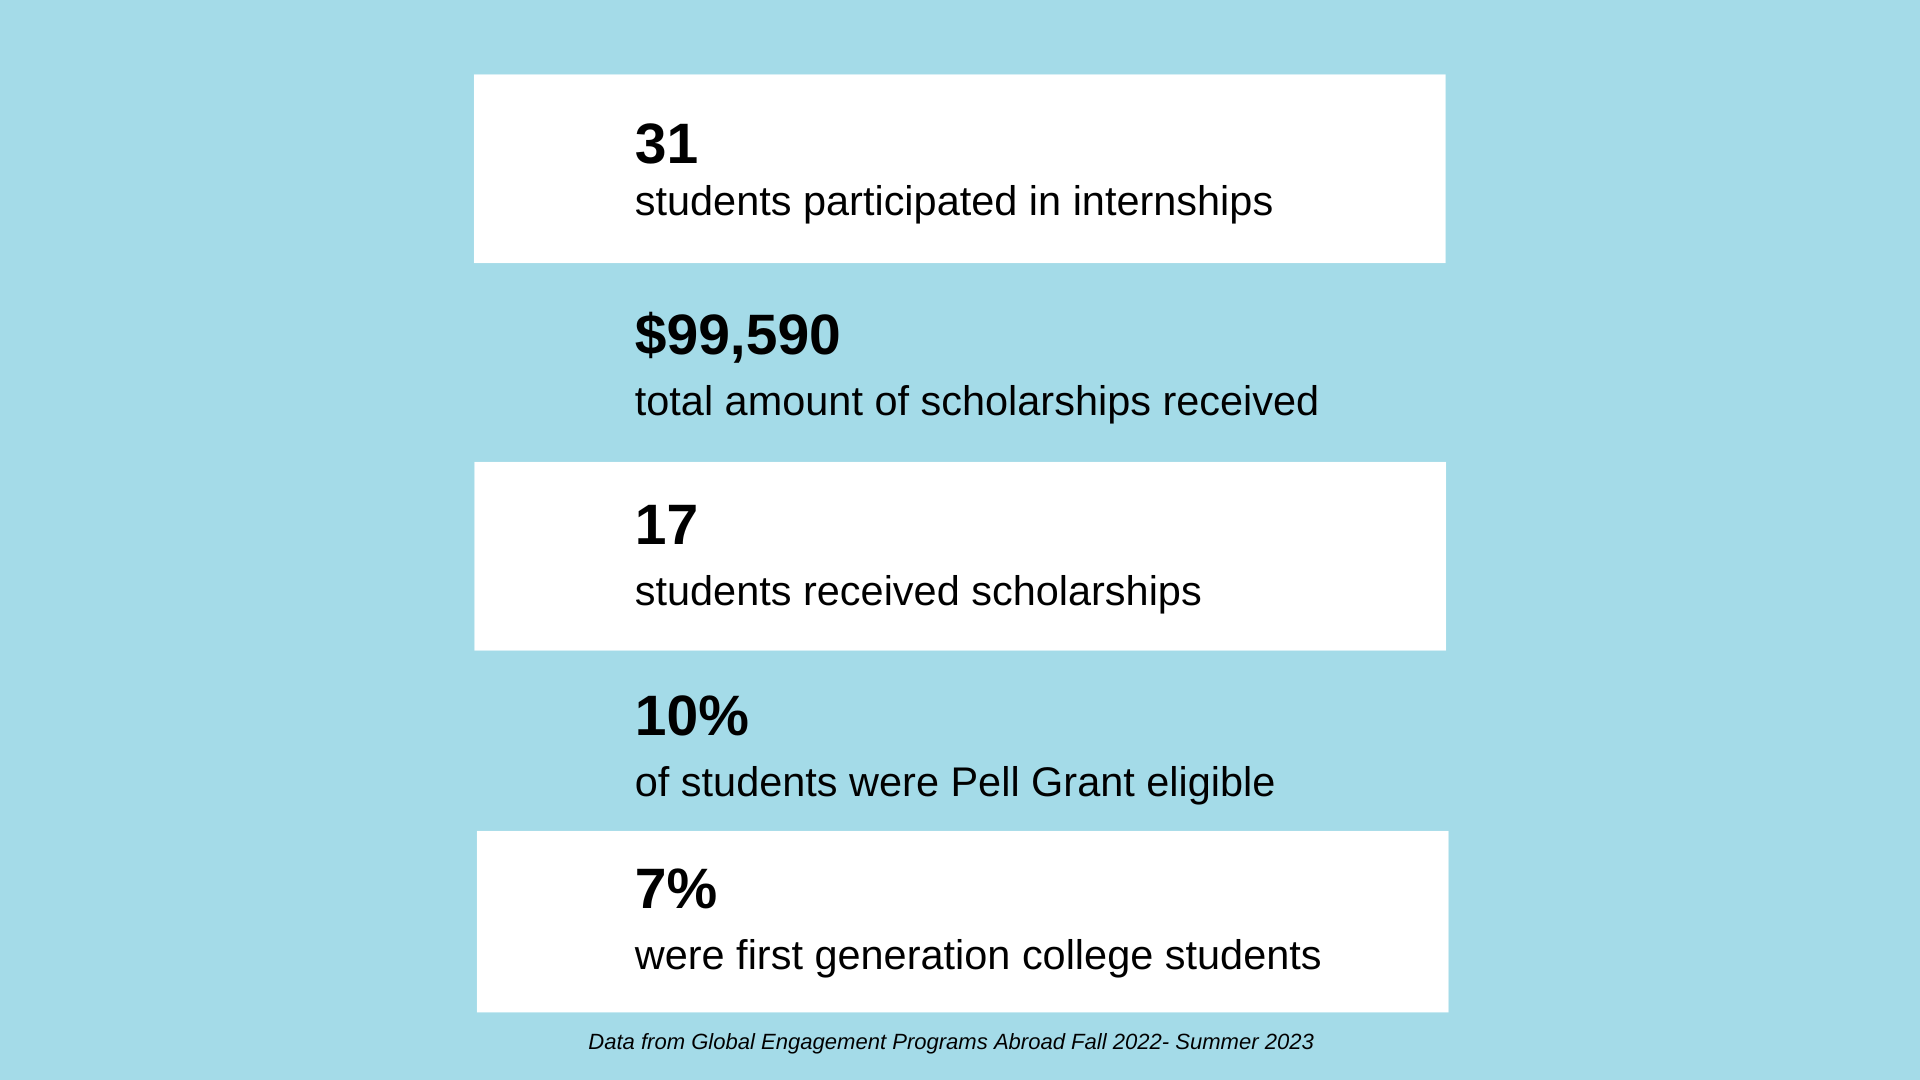 31 students participated in internships, 7% were first generation college students, 10% of students were Pell Grant eligible, $99,590 total amount of scholarships received, 17 students received scholarships